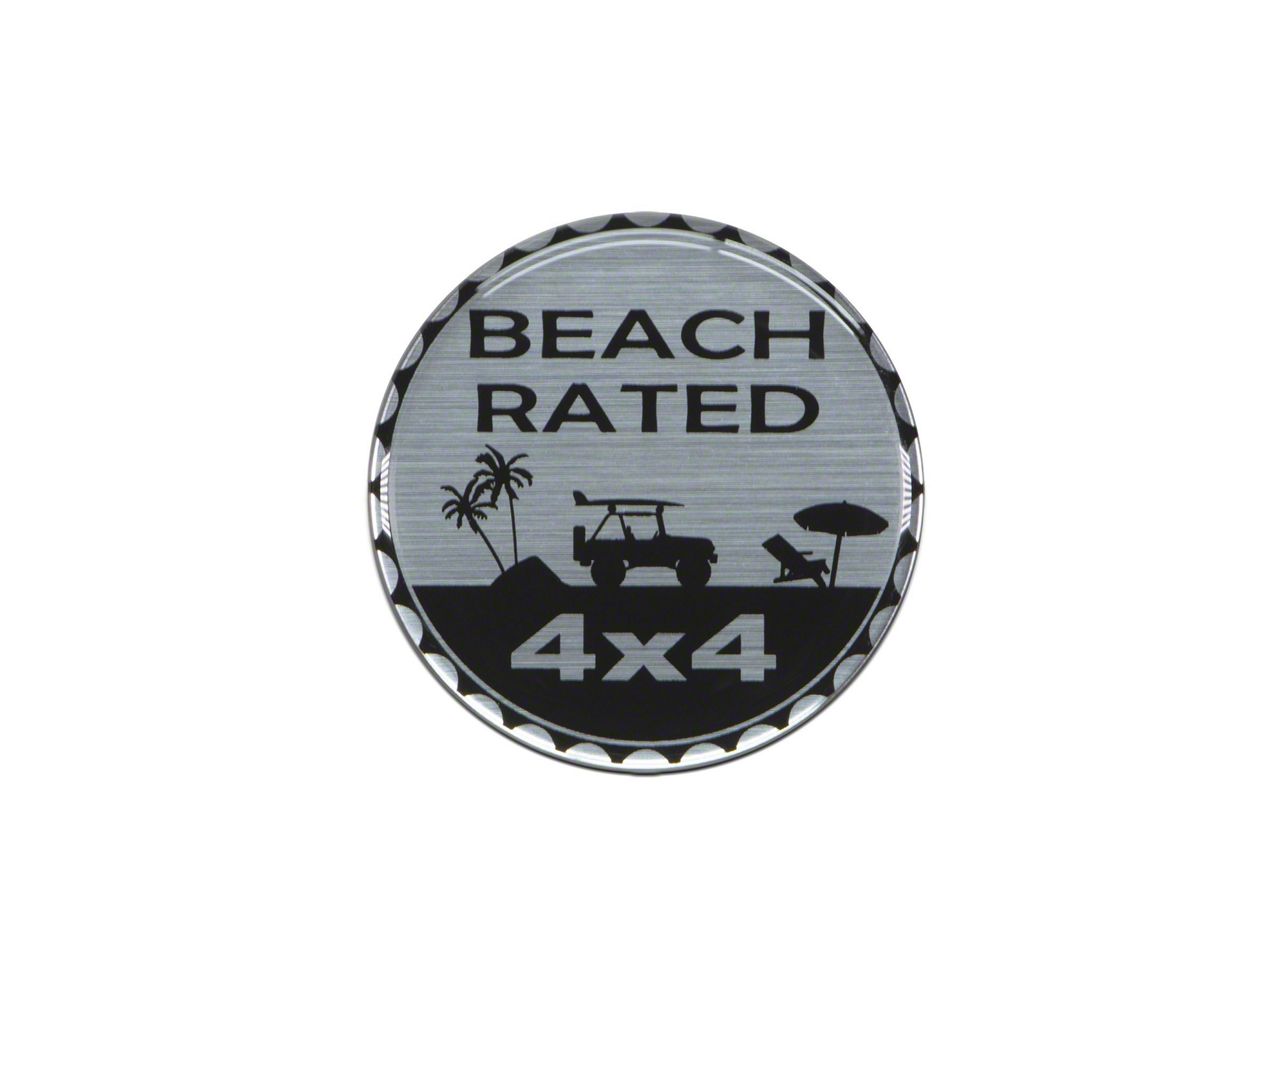 Beach Rated Badge (Universal; Some Adaptation May Be Required)